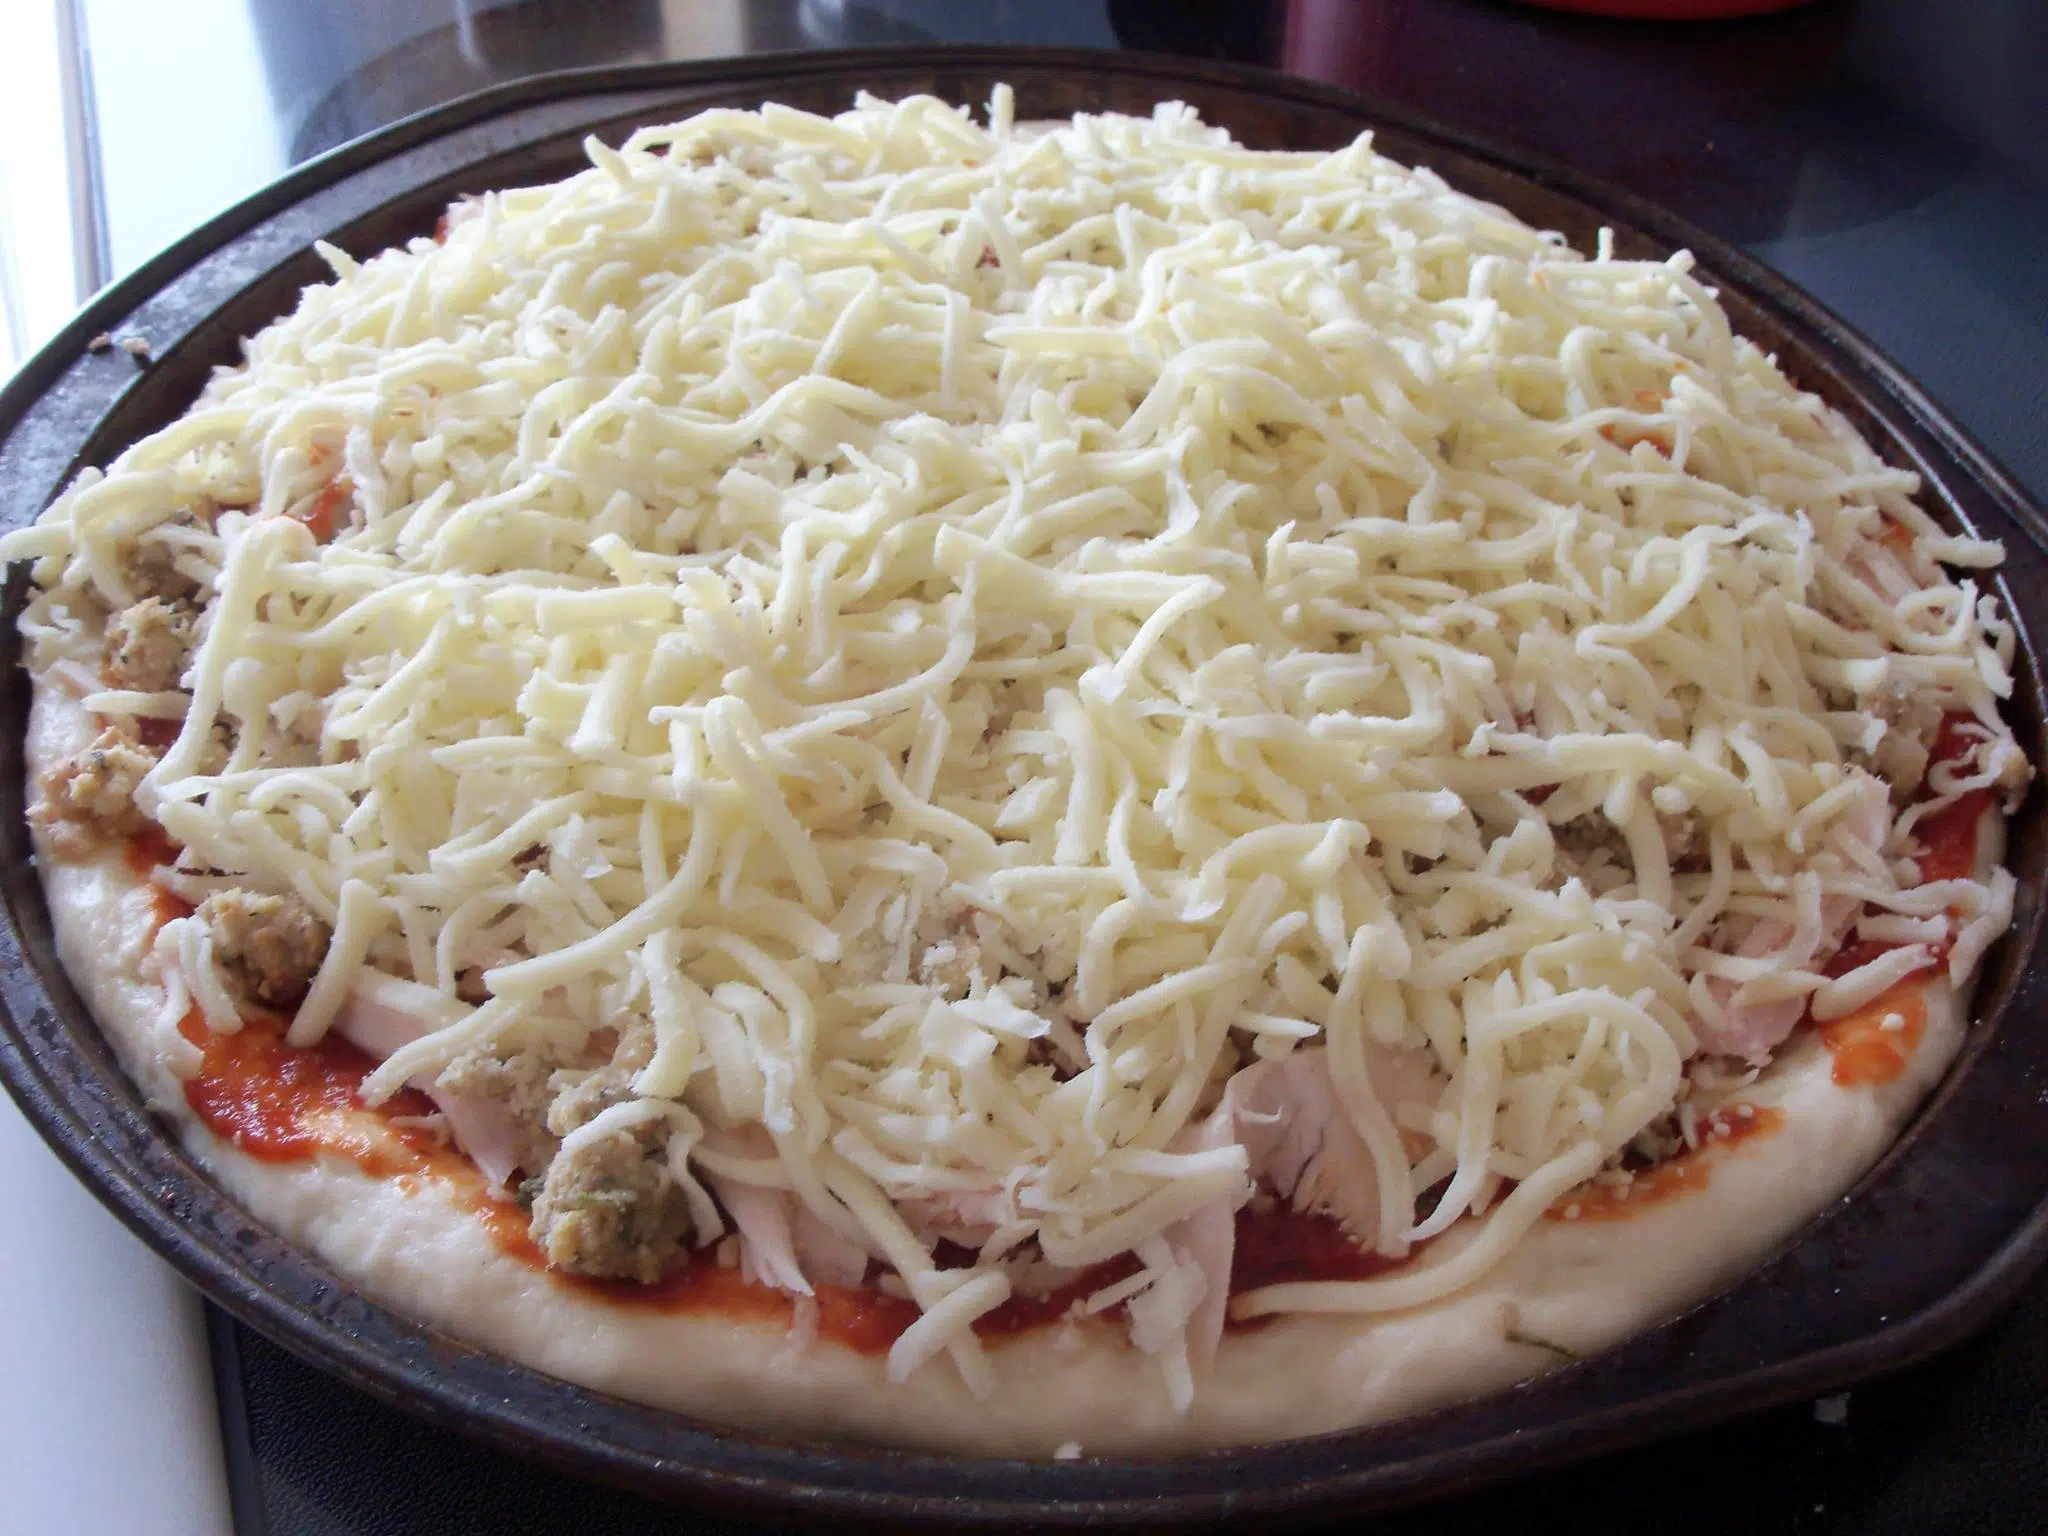 Would you combine your leftovers and  Turkey to make a  Pizza ?